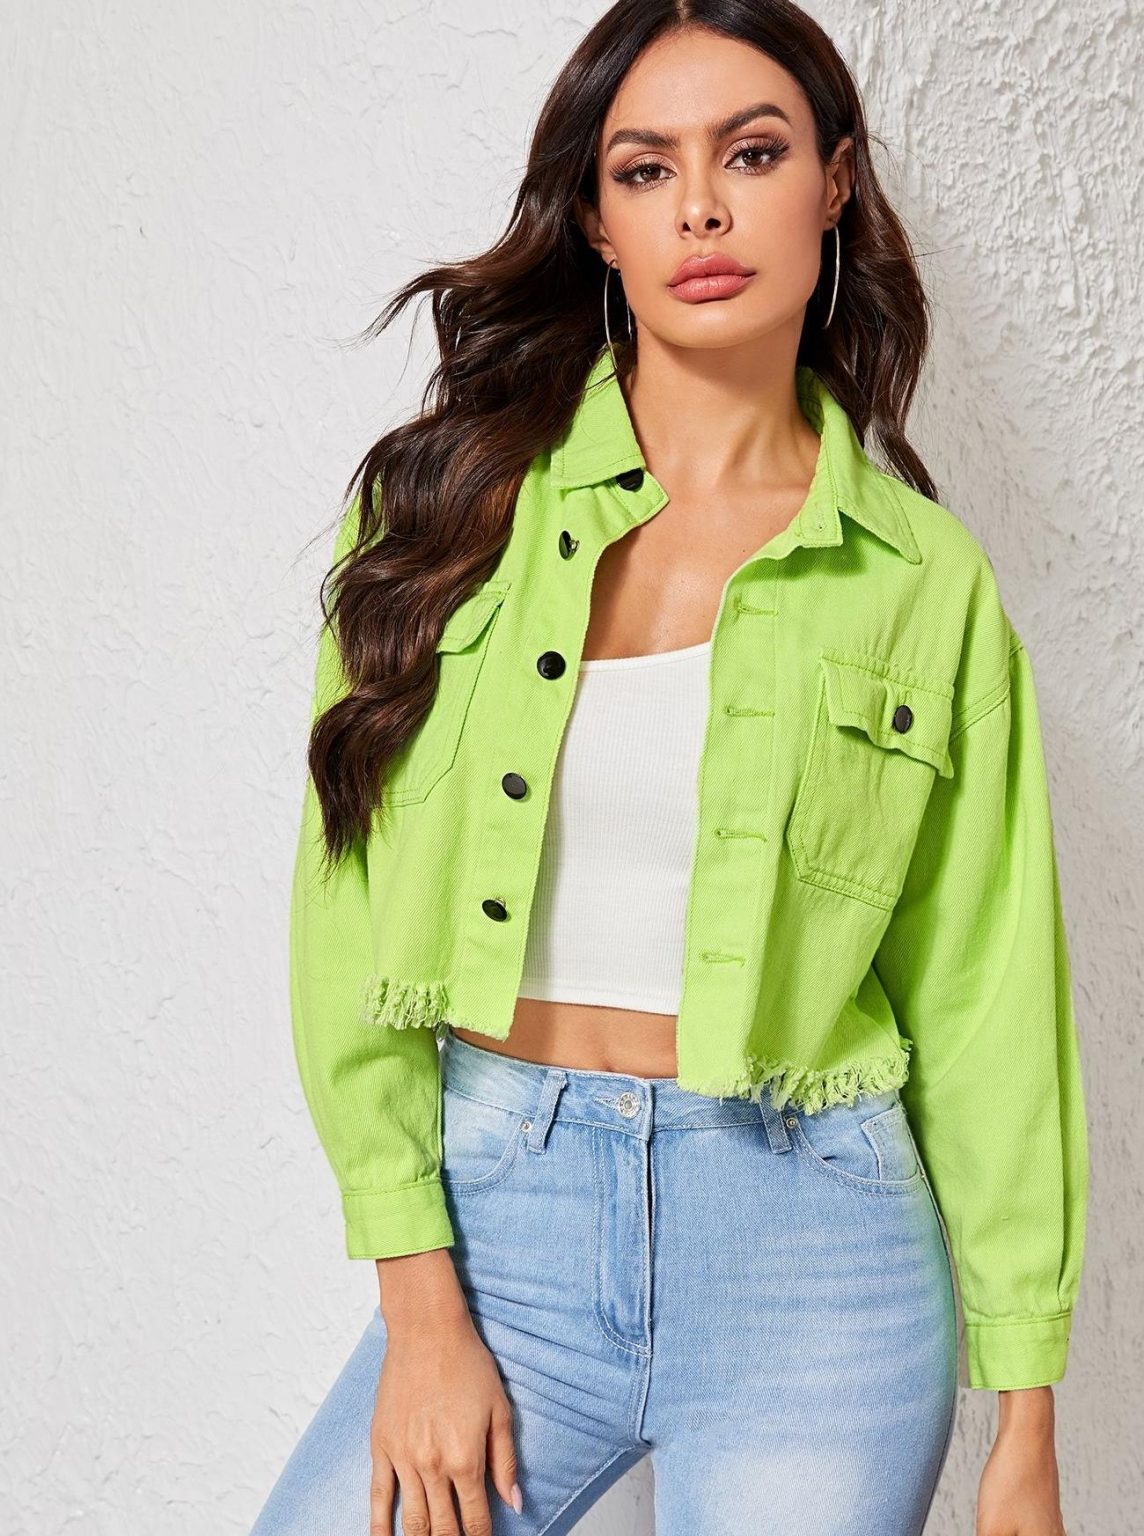 Are Green Jackets Still In Style: Best Outfit Ideas For Women 2023 ...